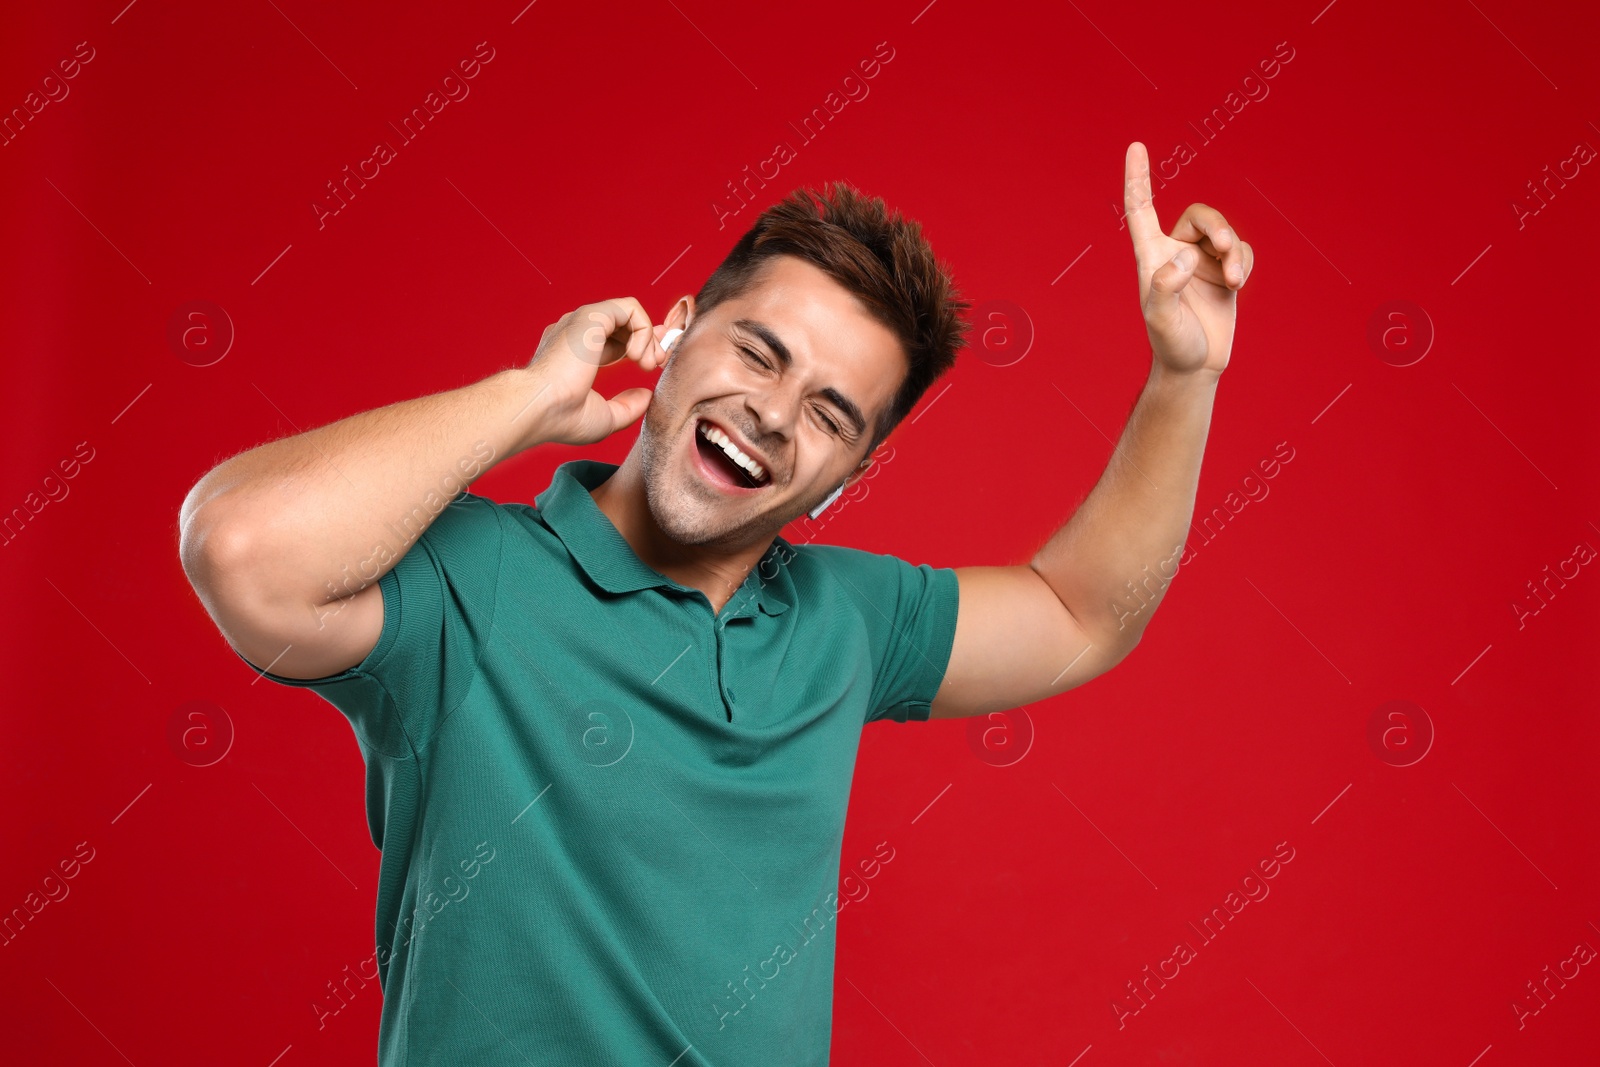 Photo of Happy young man listening to music through wireless earphones on red background